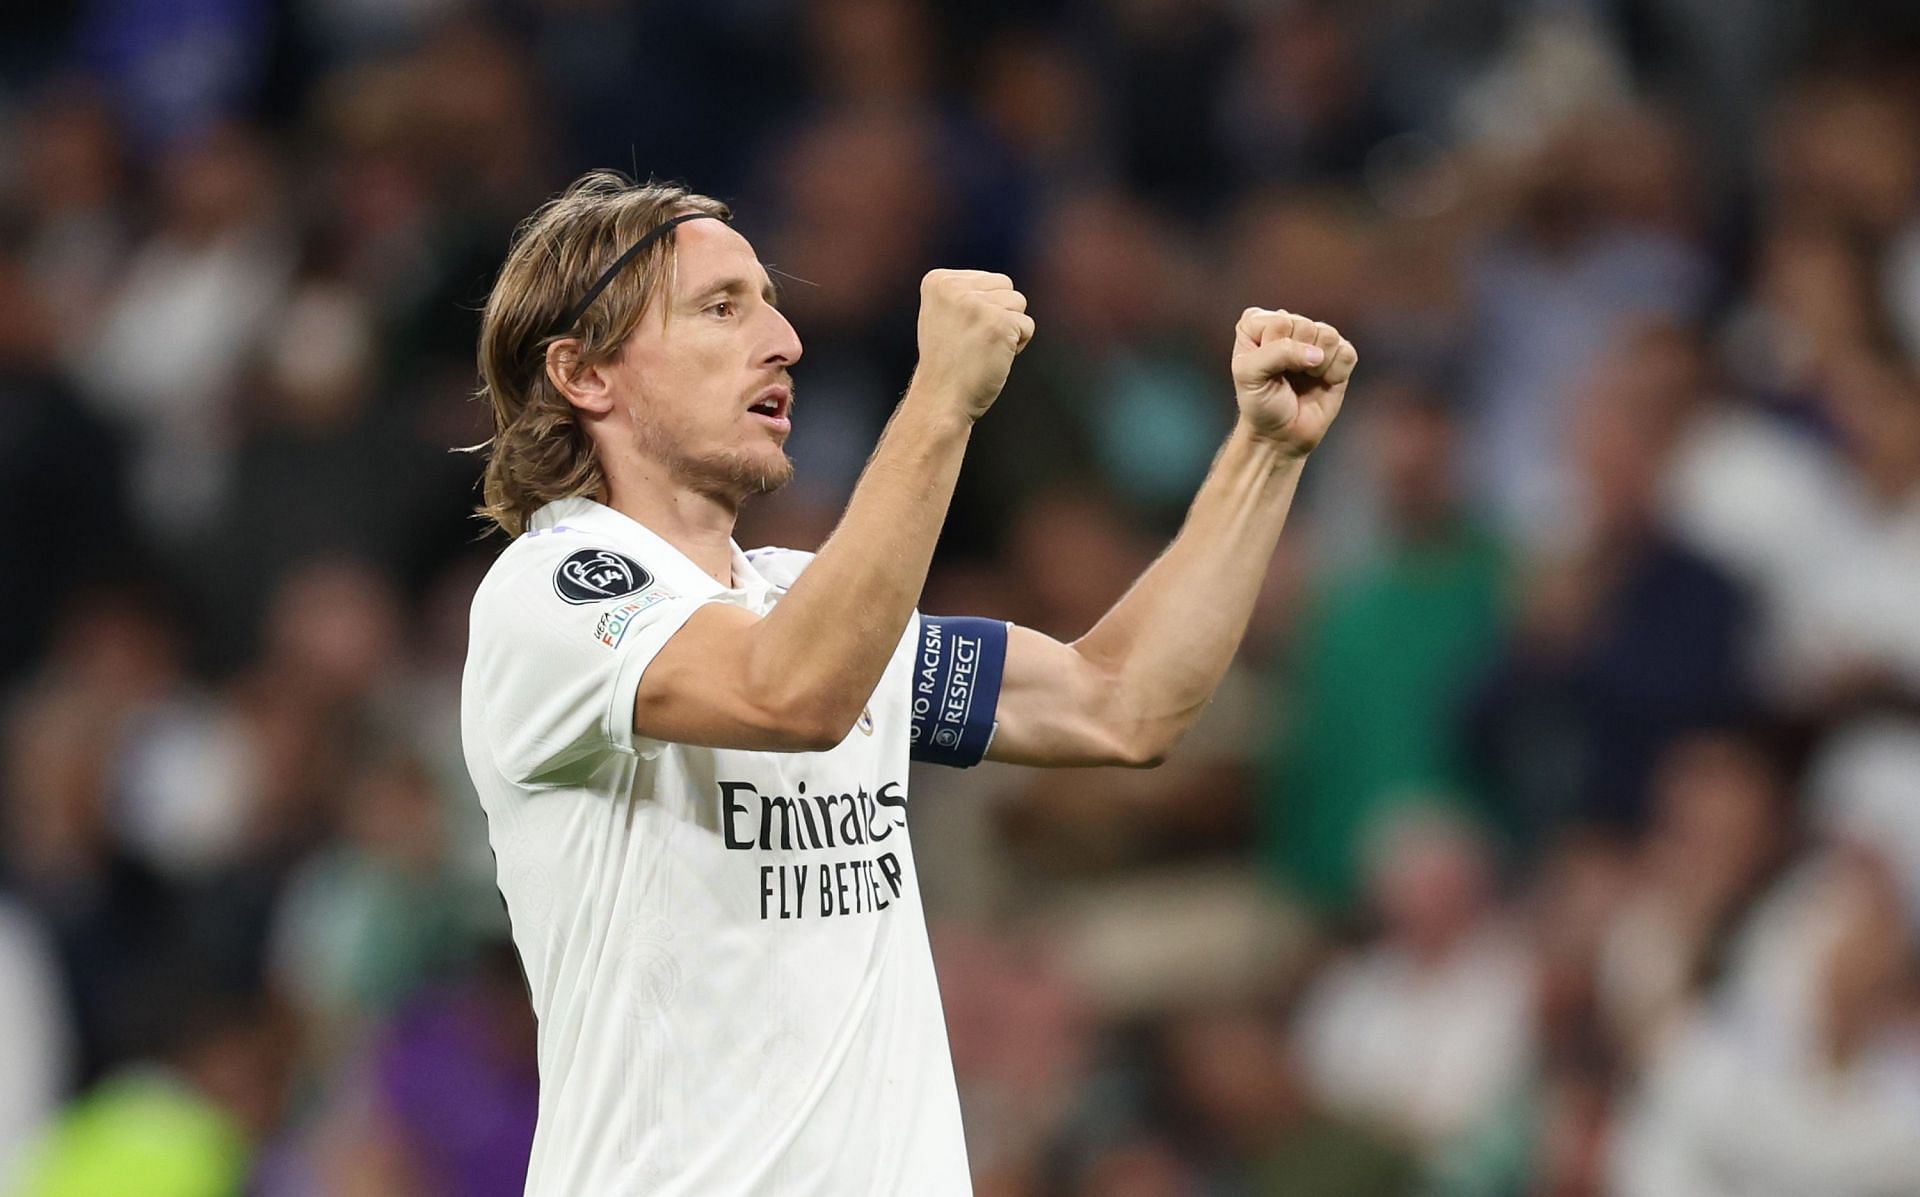 Real Madrid 5-1 Celtic 5 Hits and Flops as Modric and Rodrygo score from the spot, while Courtois saves a first-half penalty UEFA Champions League 2022-23